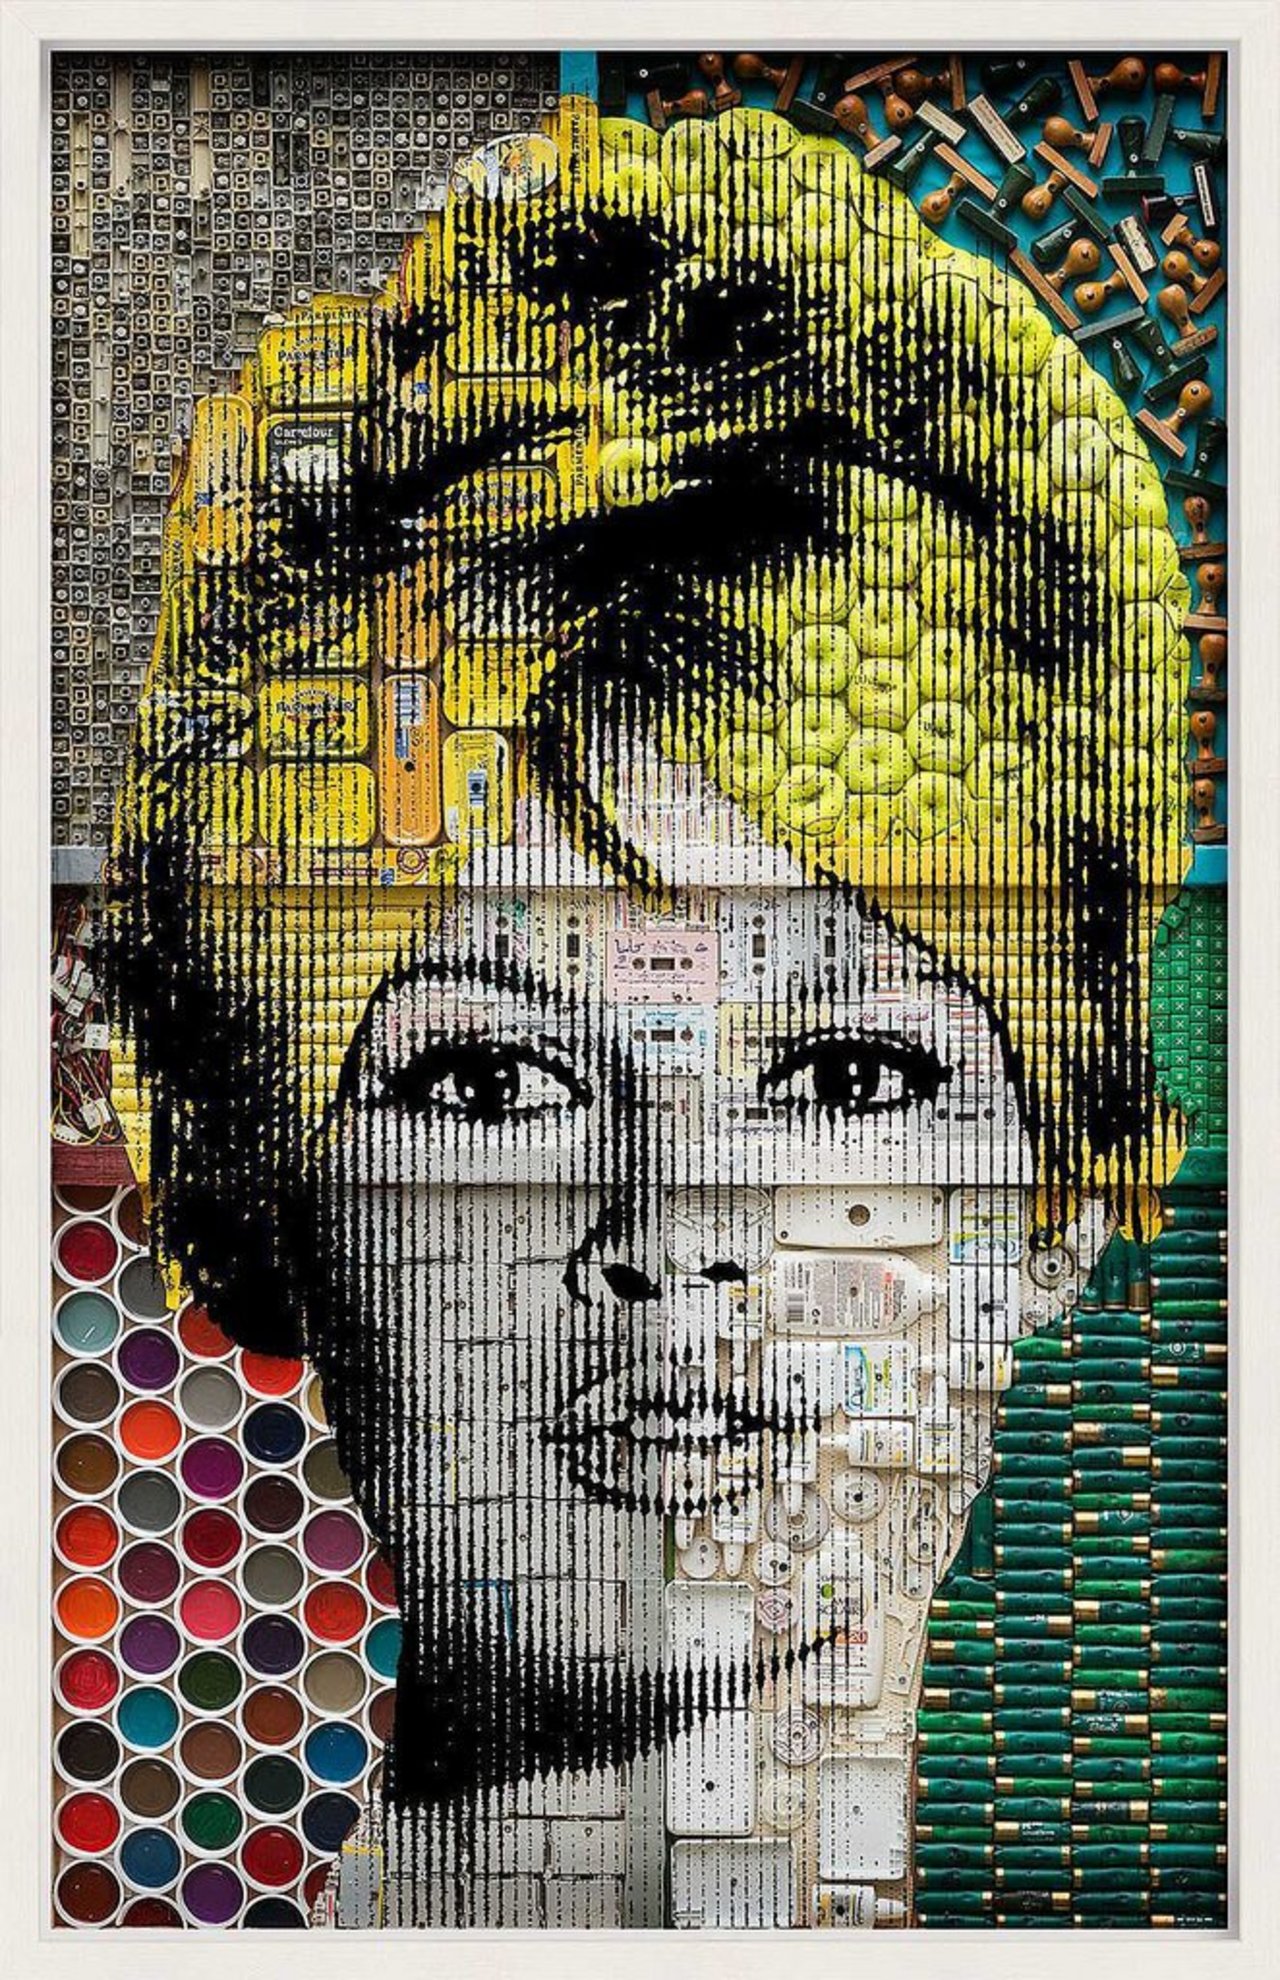 Renaud Delorme’s Unconventional Portraits of Modern Day Celebrities#PopArt #Recycling #Art https://t.co/EKrilsDimI